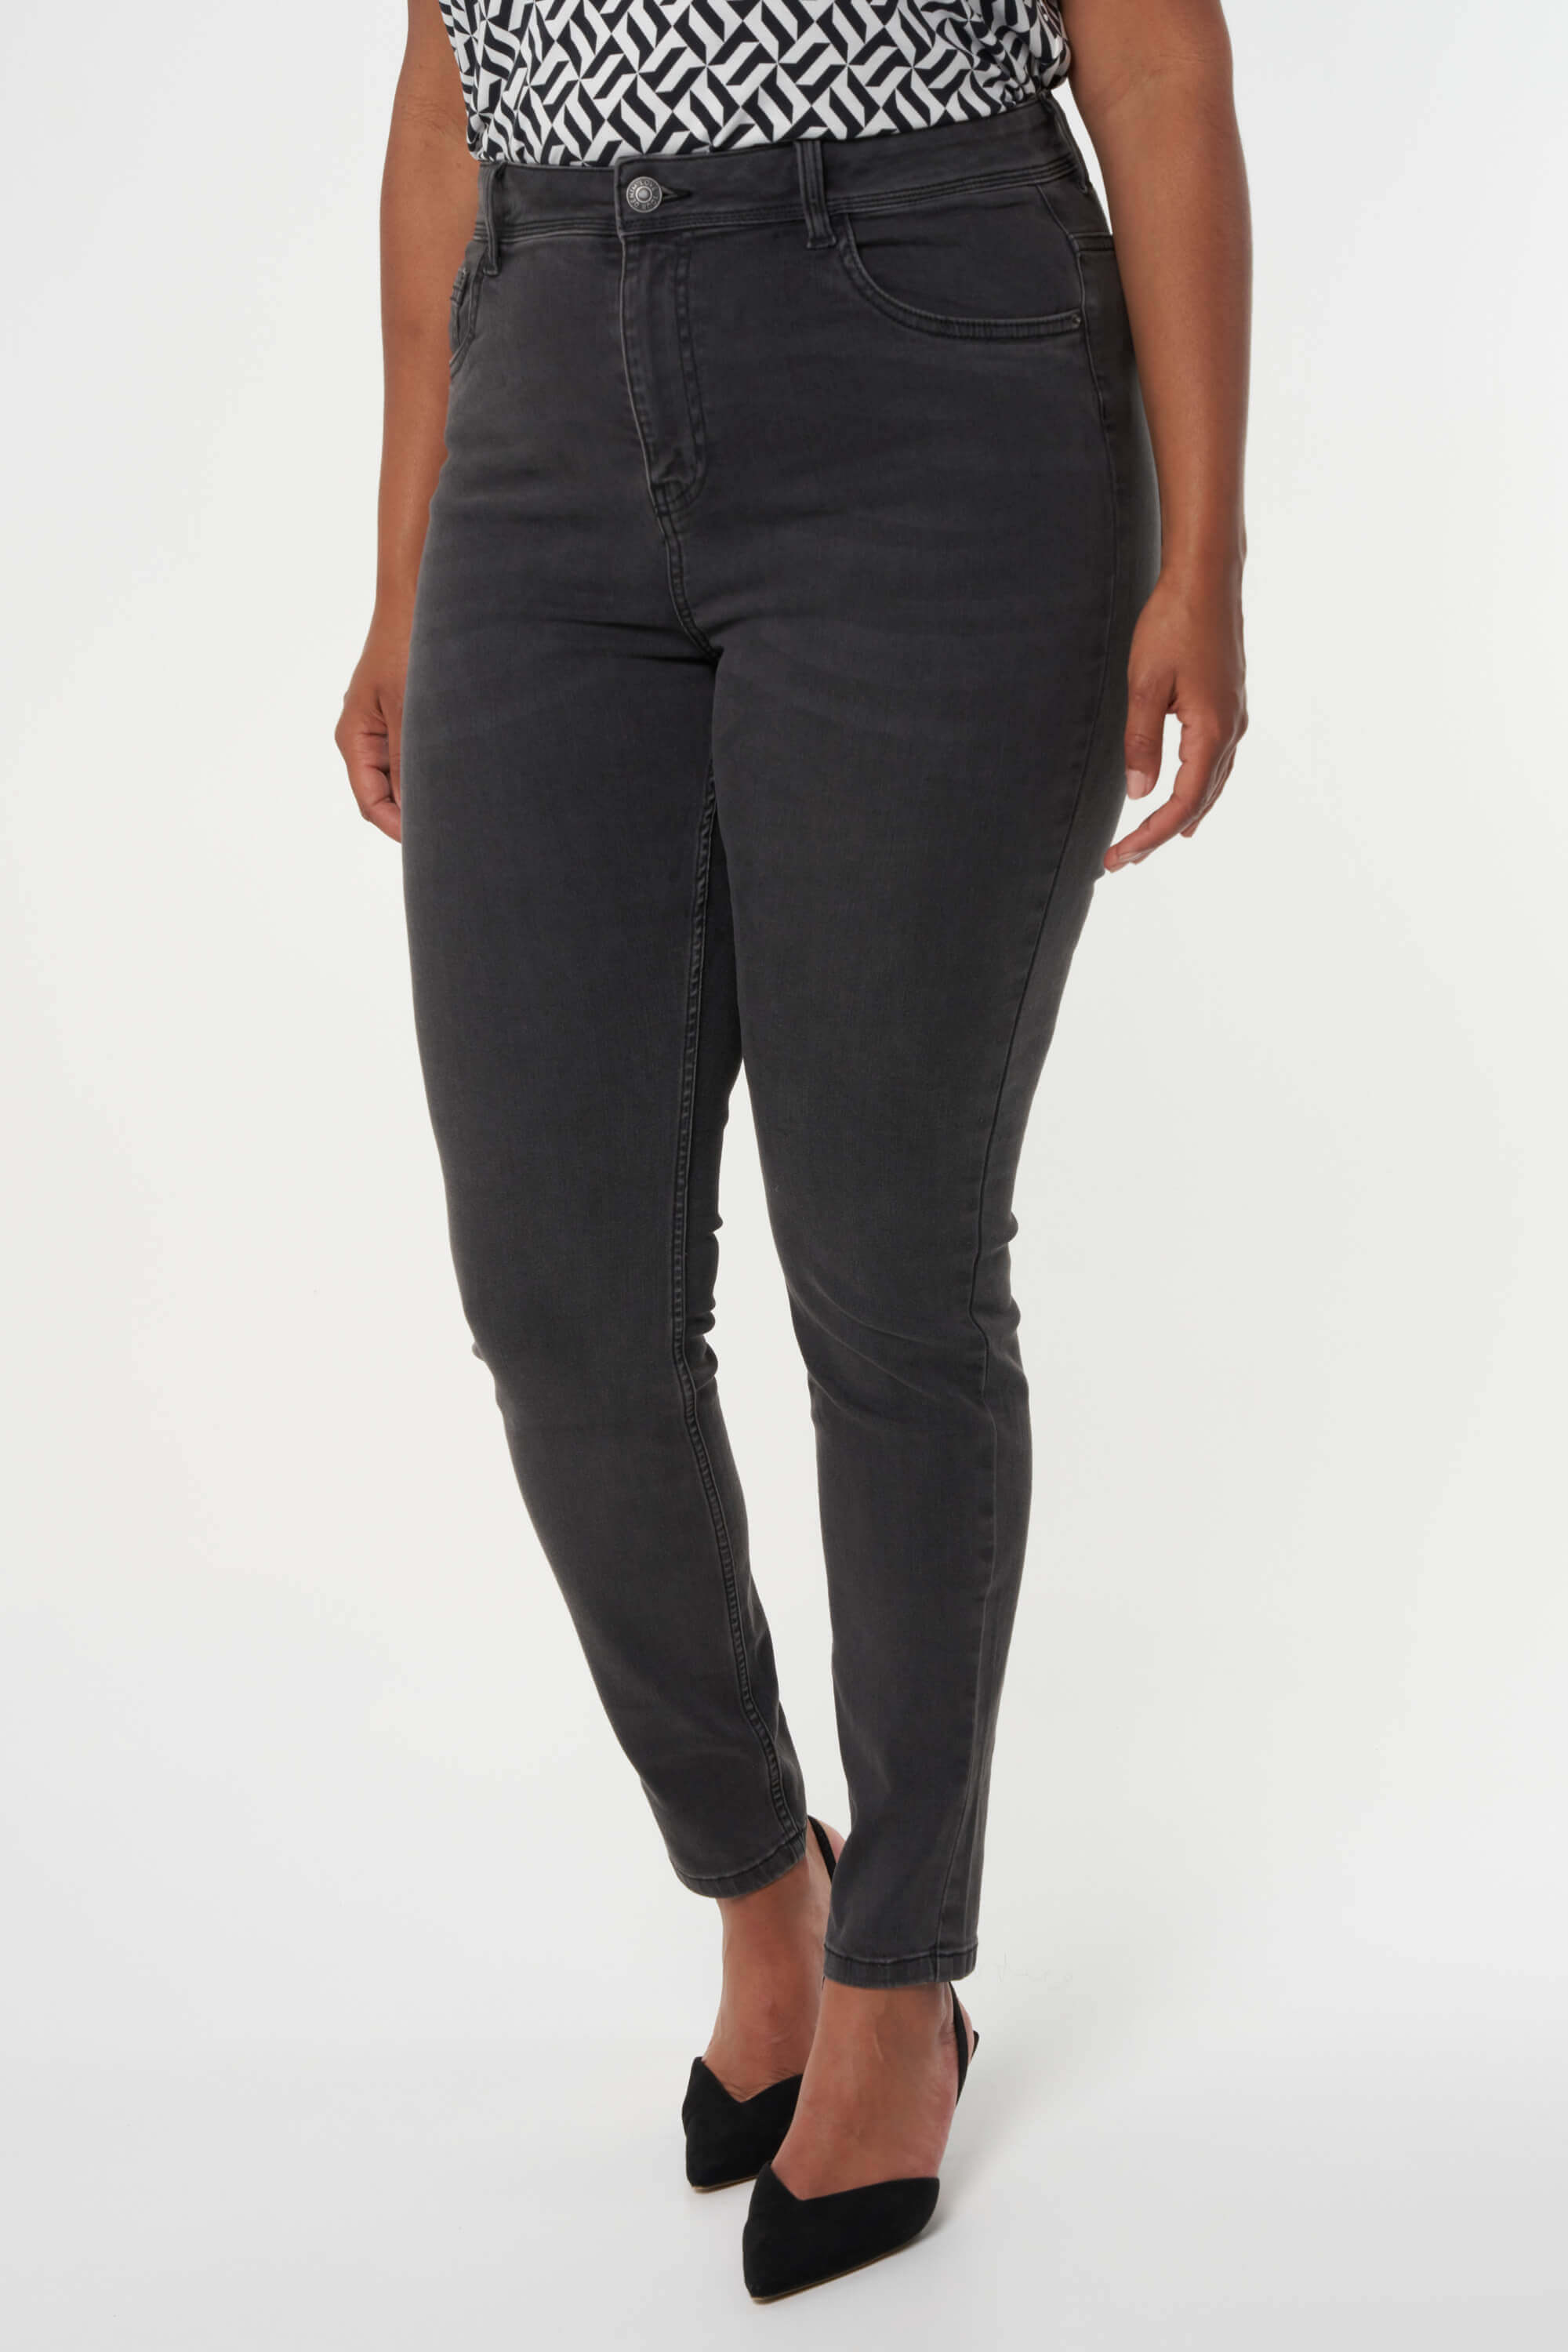 Skinny-Leg-Jeans mit hoher Taille CHERRY image 5